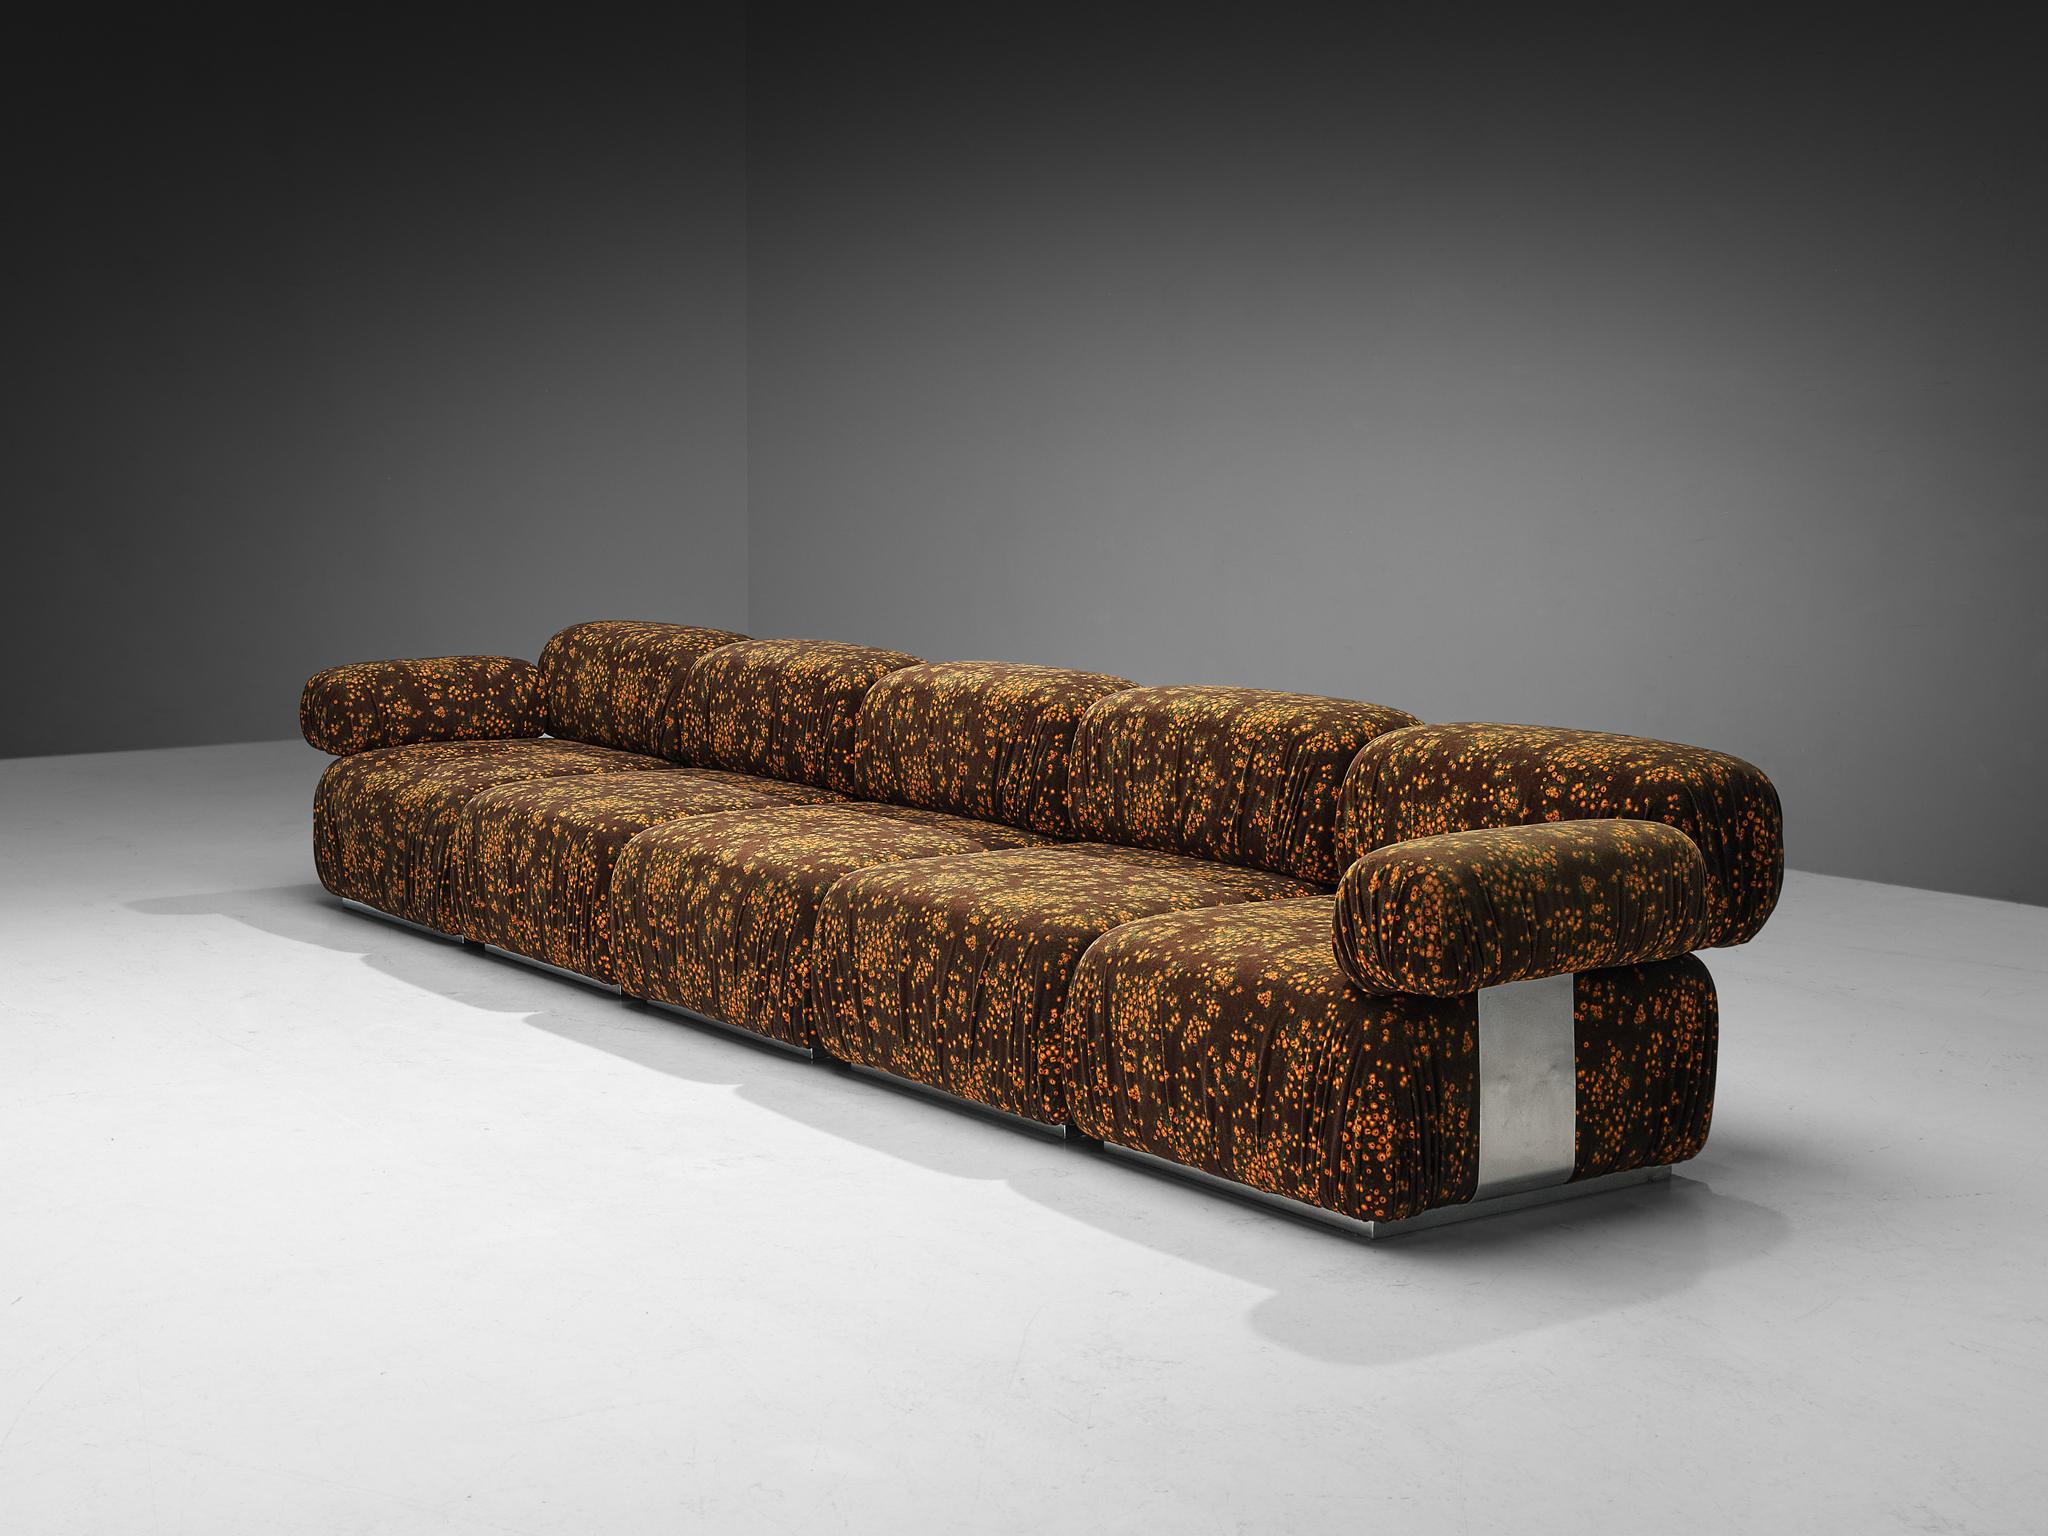 Roberto Iera for Felicerossi, sectional sofa model 'Il Colombaccio', fabric, stainless steel, Italy, 1970s

Stunnig modular sofa by Italian designer Roberto Iera for manufacturer Felicerossi. The 'Il Colombaccio', meaning wood pigeon in Italian,